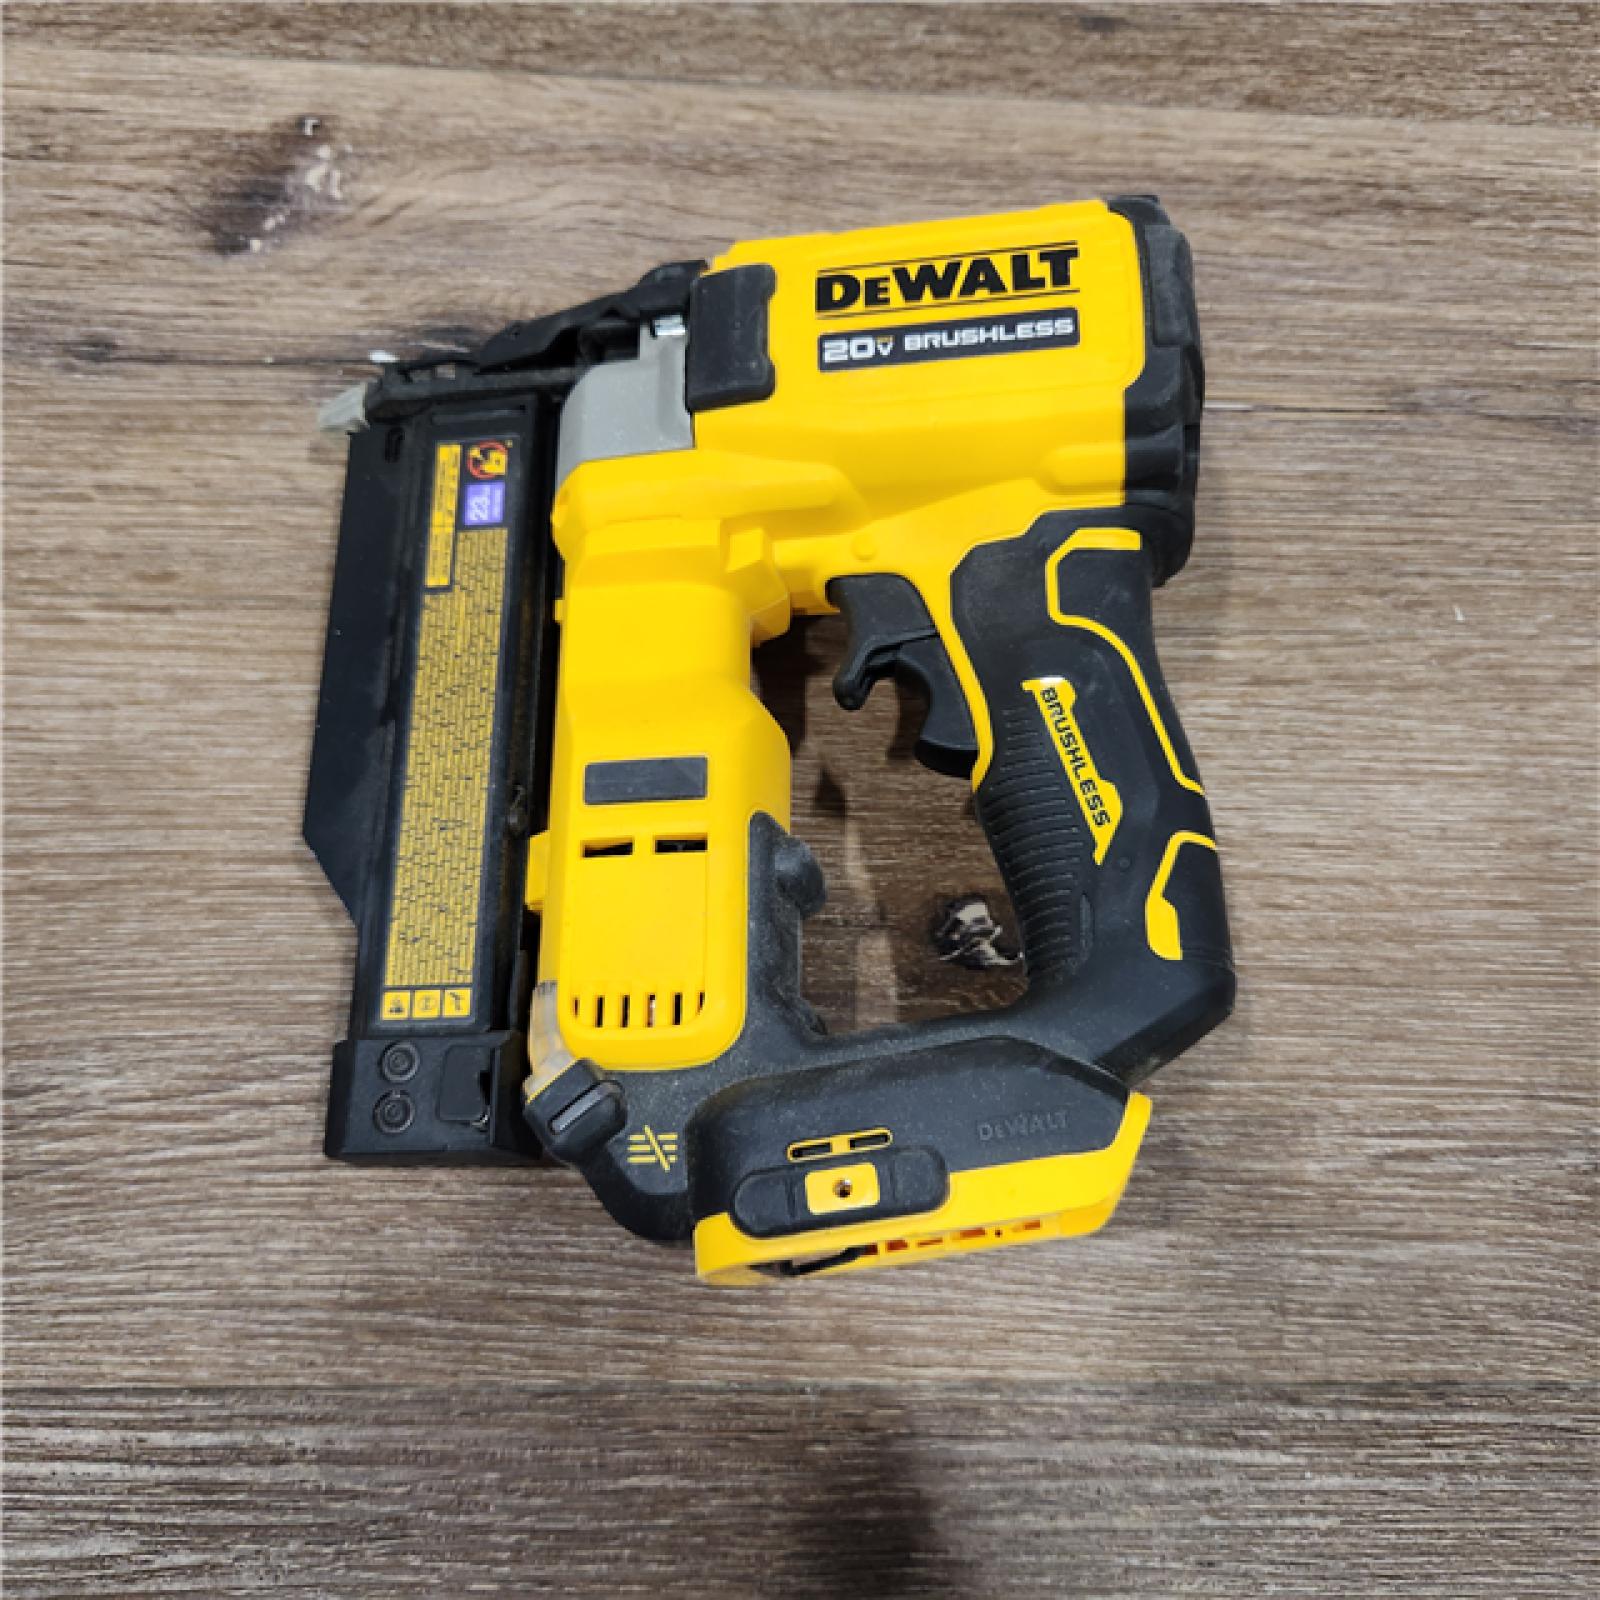 AS-IS DEWALT ATOMIC 20V MAX Brushless Cordless 23 Gauge Pin Nailer Kit (not included Battery)